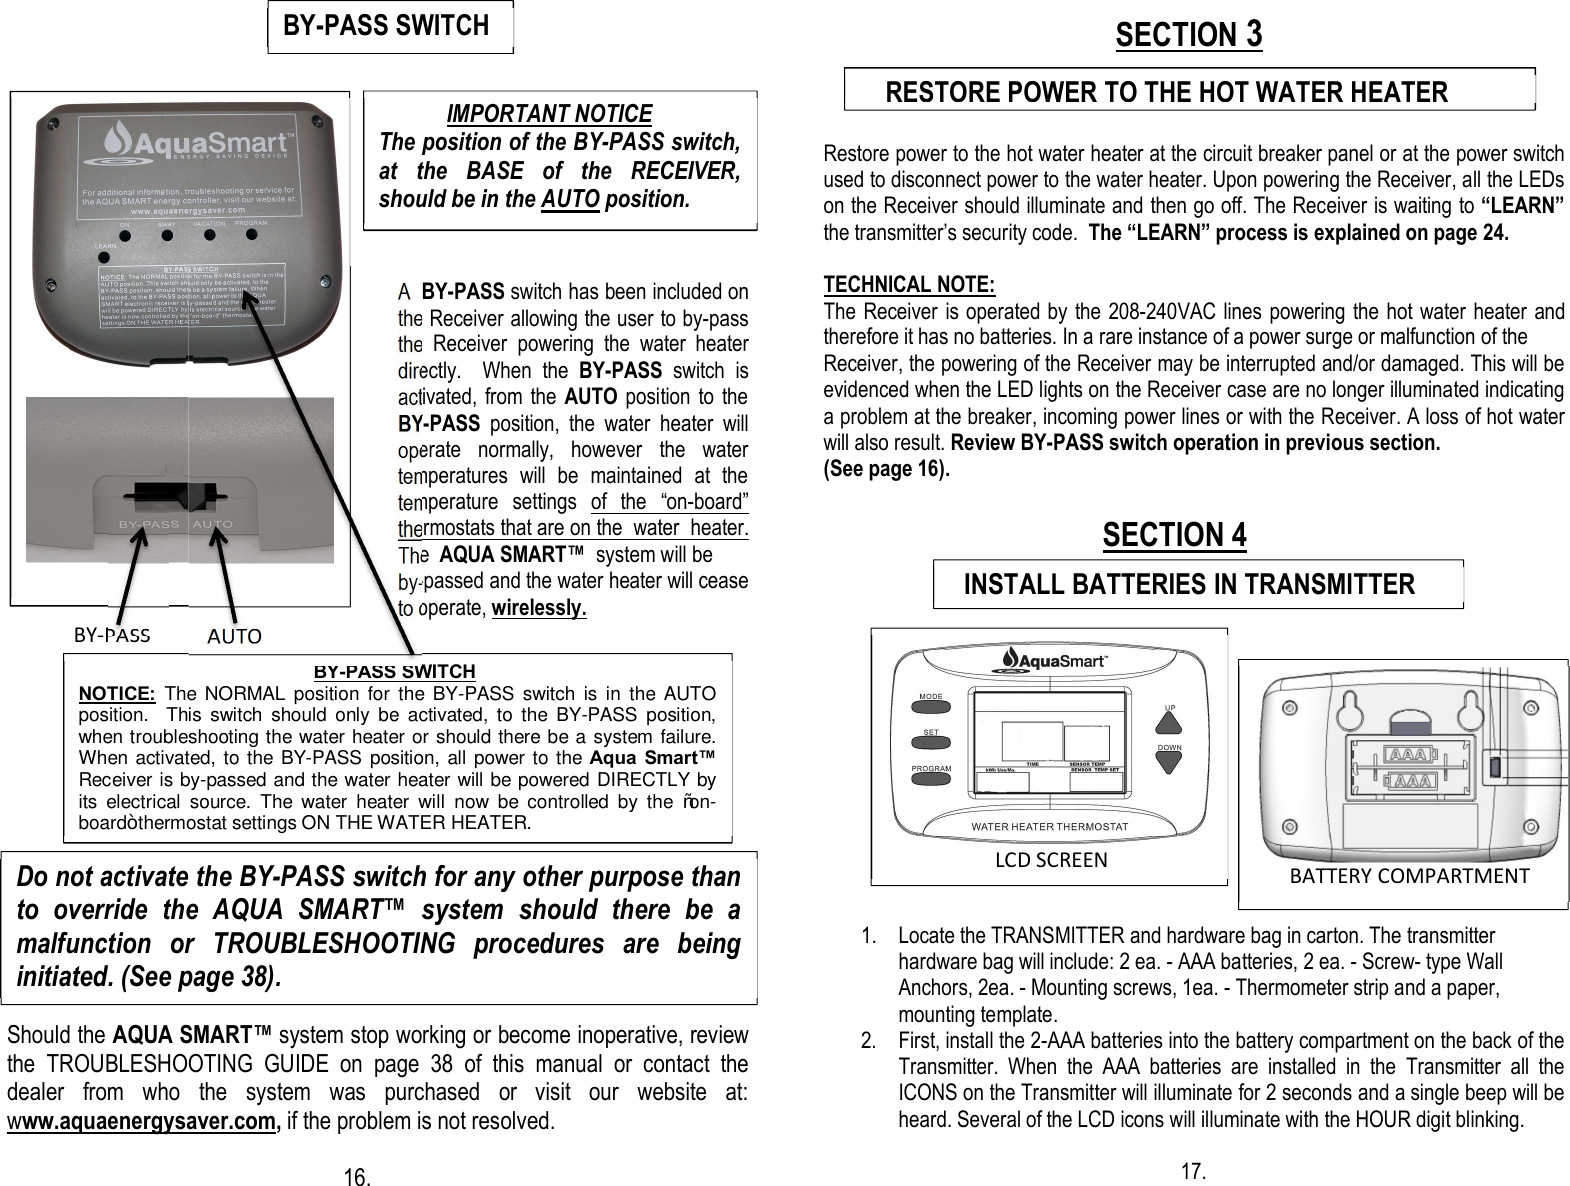                                                                                                                                                                                                                                                                         A  BY-PASS switch has been included on the Receiver allowing the user to by-pass the  Receiver  powering  the  water  heater directly.    When  the  BY-PASS  switch  is activated,  from the  AUTO position to  the BY-PASS  position,  the  water  heater  will operate  normally,  however  the  water temperatures  will  be  maintained  at  the temperature  settings  of  the  “on-board” thermostats that are on the  water  heater. The  AQUA SMART™  system will be  by-passed and the water heater will cease to operate, wirelessly.   BY-PASS           AUTO                                        Should the AQUA SMART™ system stop working or become inoperative, review the  TROUBLESHOOTING  GUIDE  on  page  38  of  this  manual  or  contact  the dealer  from  who  the  system  was  purchased  or  visit  our  website  at: www.aquaenergysaver.com, if the problem is not resolved.                                                                                                                         16.                                                                                                                SECTION 3  Restore power to the hot water heater at the circuit breaker panel or at the power switch used to disconnect power to the water heater. Upon powering the Receiver, all the LEDs on the Receiver should illuminate and then go off. The Receiver is waiting to “LEARN” the transmitter’s security code.  The “LEARN” process is explained on page 24.  TECHNICAL NOTE: The Receiver is operated by the 208-240VAC lines powering the hot water heater and therefore it has no batteries. In a rare instance of a power surge or malfunction of the  Receiver, the powering of the Receiver may be interrupted and/or damaged. This will be evidenced when the LED lights on the Receiver case are no longer illuminated indicating a problem at the breaker, incoming power lines or with the Receiver. A loss of hot water will also result. Review BY-PASS switch operation in previous section. (See page 16).                                                                                         SECTION 4               1. Locate the TRANSMITTER and hardware bag in carton. The transmitter hardware bag will include: 2 ea. - AAA batteries, 2 ea. - Screw- type Wall Anchors, 2ea. - Mounting screws, 1ea. - Thermometer strip and a paper, mounting template. 2. First, install the 2-AAA batteries into the battery compartment on the back of the Transmitter.  When  the  AAA  batteries  are  installed  in  the  Transmitter  all  the ICONS on the Transmitter will illuminate for 2 seconds and a single beep will be heard. Several of the LCD icons will illuminate with the HOUR digit blinking.                                17.                         LCD SCREEN    RESTORE POWER TO THE HOT WATER HEATER        BATTERY COMPARTMENT     Do not activate the BY-PASS switch for any other purpose than to  override  the  AQUA  SMART™  system  should  there  be  a malfunction  or  TROUBLESHOOTING  procedures  are  being initiated. (See page 38).                                              BY-PASS SWITCH NOTICE:  The NORMAL  position  for  the BY-PASS switch  is  in  the  AUTO position.    This  switch  should  only  be  activated,  to  the  BY-PASS  position, when troubleshooting the water heater or should there be a system failure.  When activated, to the BY-PASS position, all power to the Aqua  Smart™ Receiver is by-passed and the water heater will be powered DIRECTLY by its  electrical  source.  The  water  heater  will  now  be  controlled  by  the  “on-board” thermostat settings ON THE WATER HEATER.               IMPORTANT NOTICE The position of the BY-PASS switch, at  the  BASE  of  the  RECEIVER, should be in the AUTO position.    INSTALL BATTERIES IN TRANSMITTER BY-PASS SWITCH  